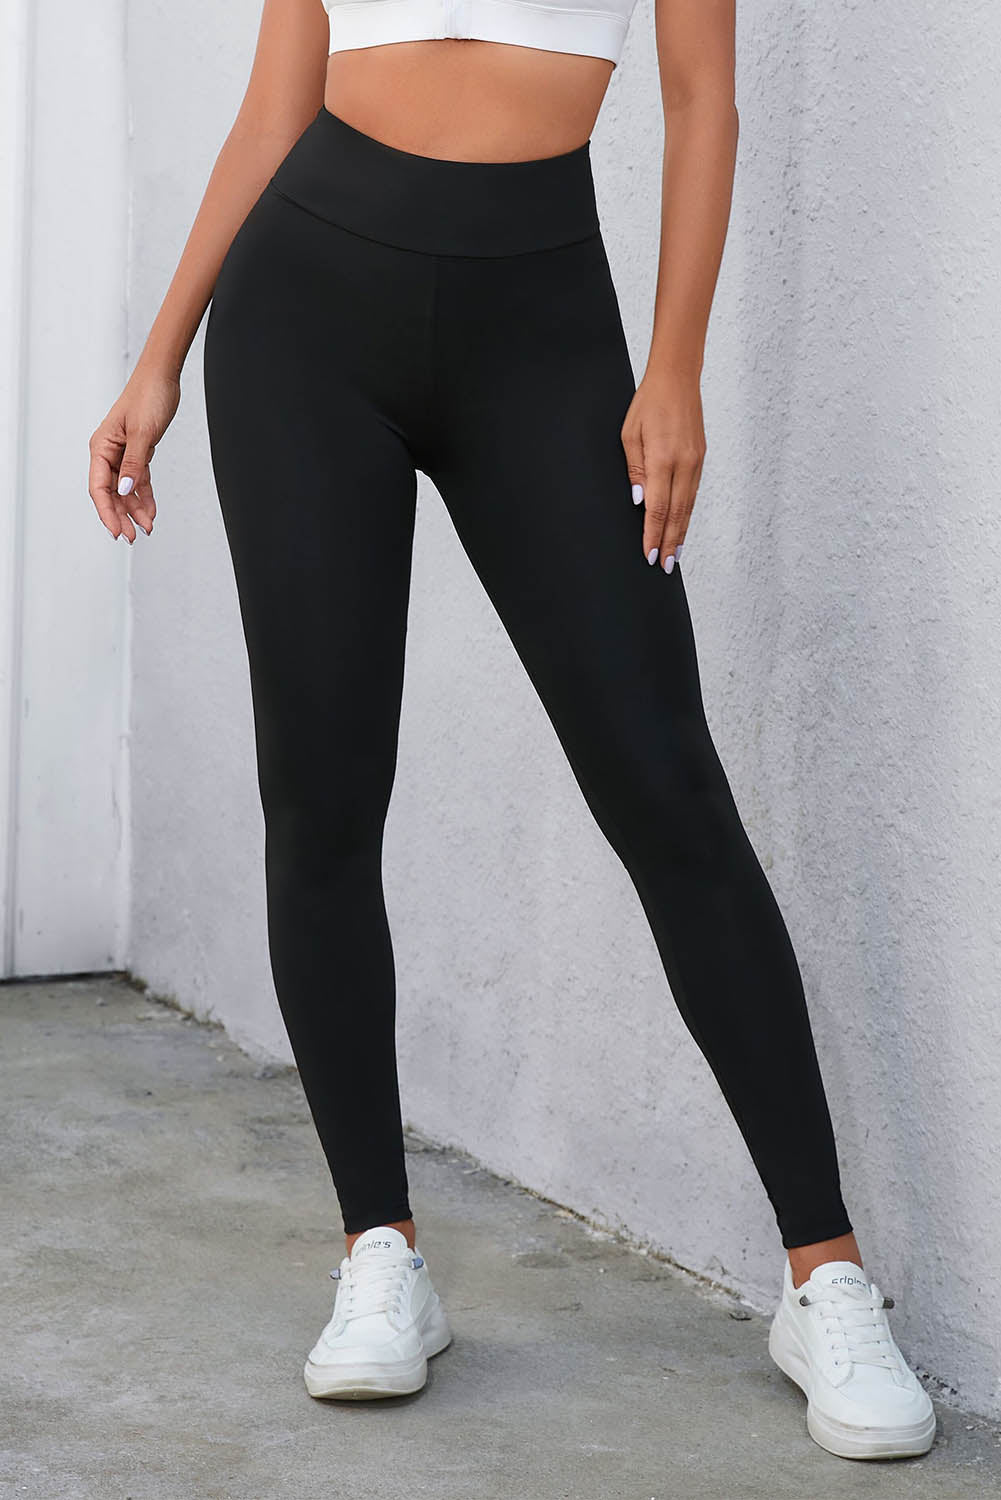  THE GYM PEOPLE Women's V Cross Waist Workout Leggings Tummy  Control Running Yoga Pants with Pockets Black : Clothing, Shoes & Jewelry